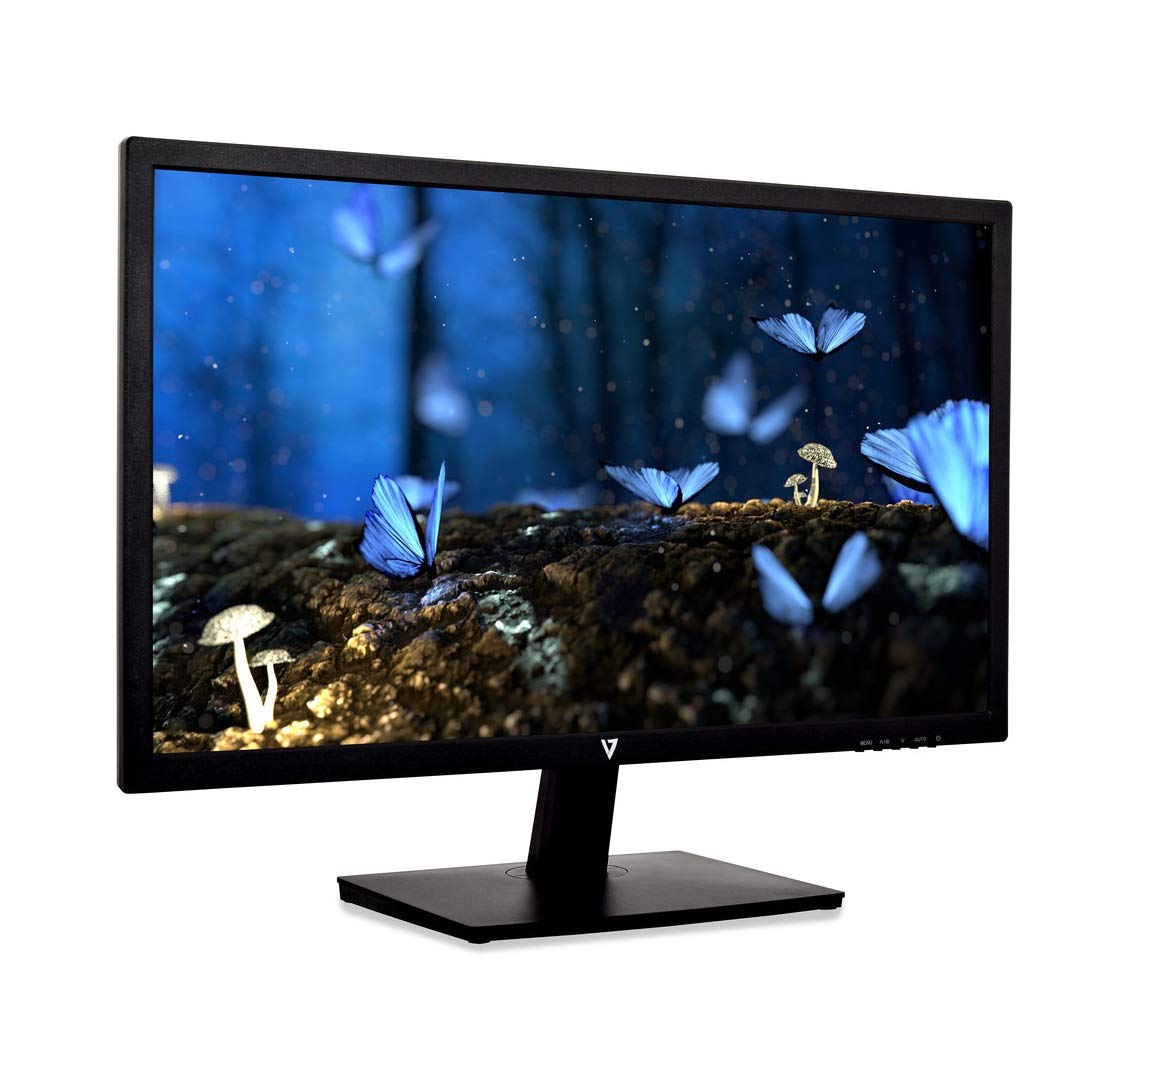 MONITOR LED 23.6IN 1080P 16:9